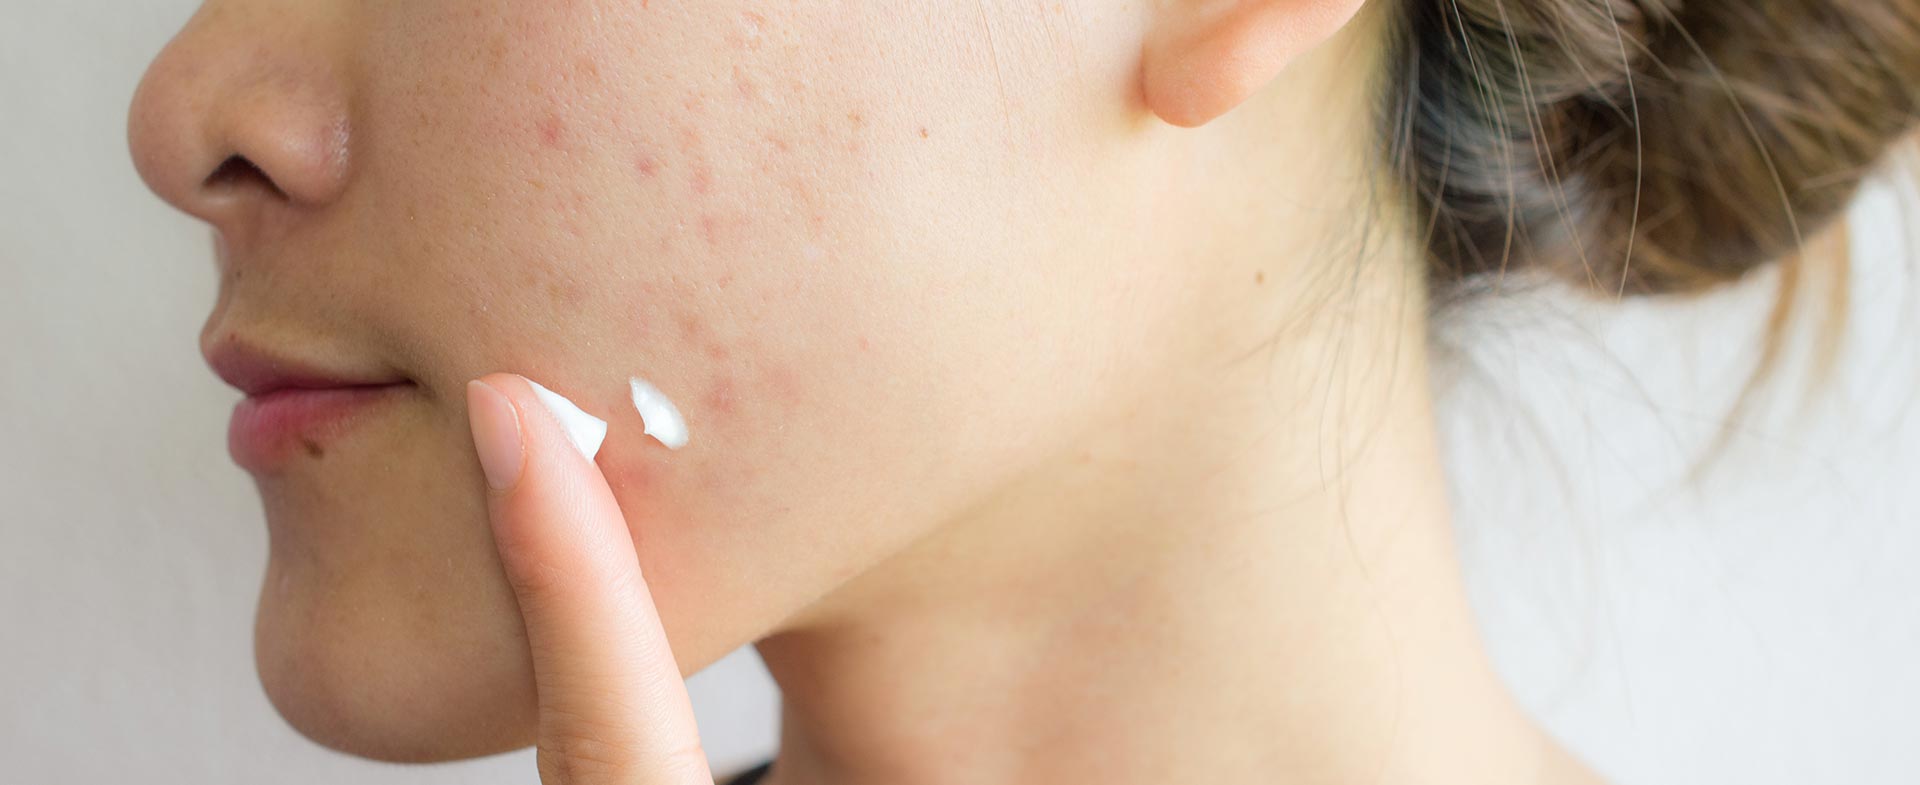 6 Amazing Ways to Treat Acne When You Have Dry Skin